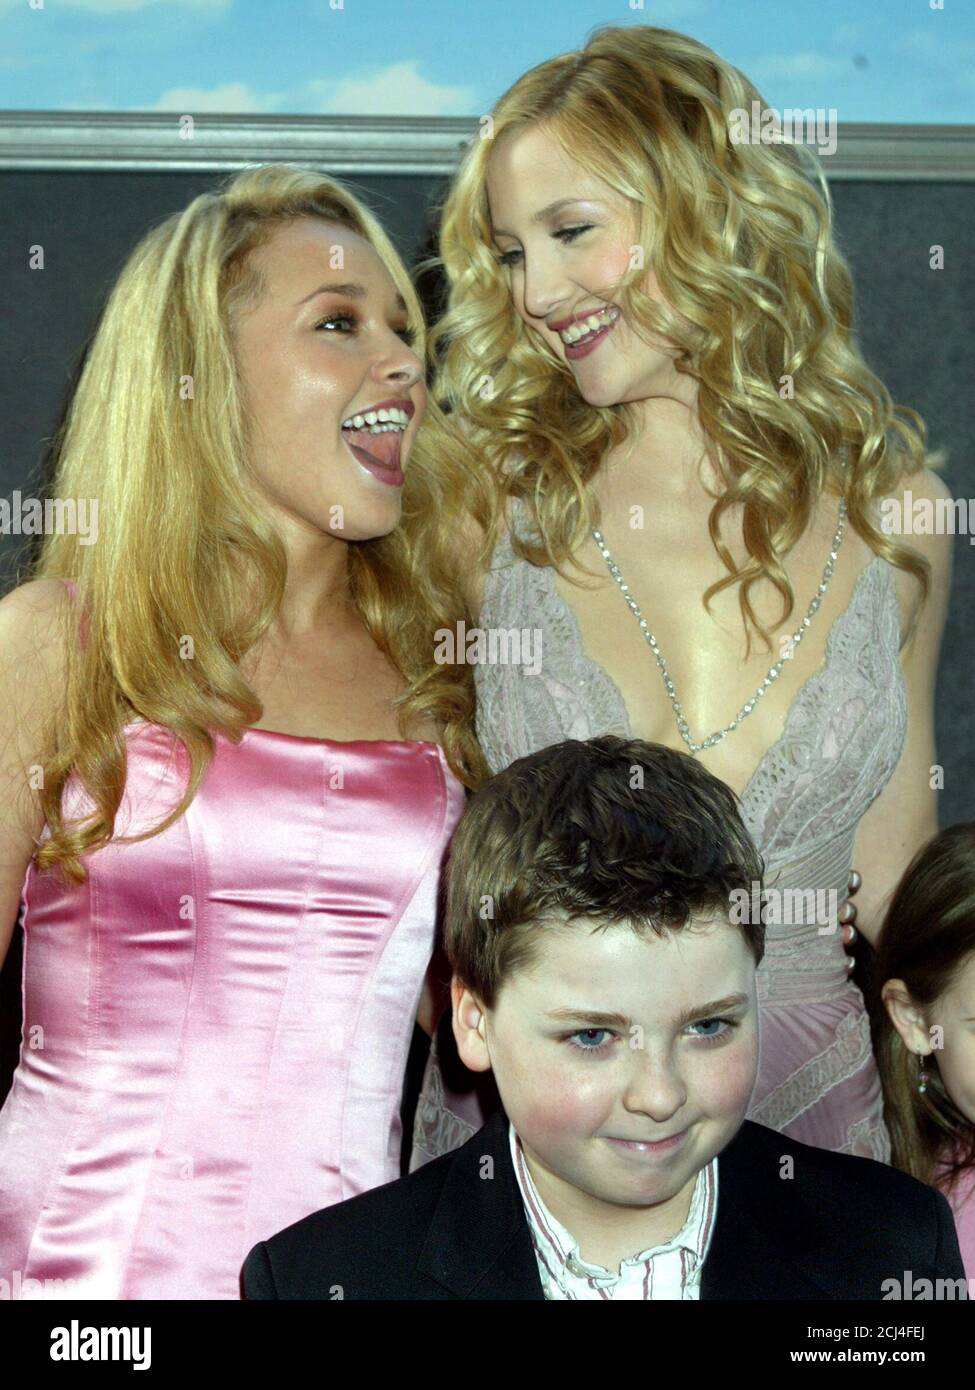 Actress Kate Hudson poses at the premiere of her new comedy film "Raising  Helen" in Hollywood May 26, 2004 with the children from the film. Hudson  portrays a modeling agency assistant who